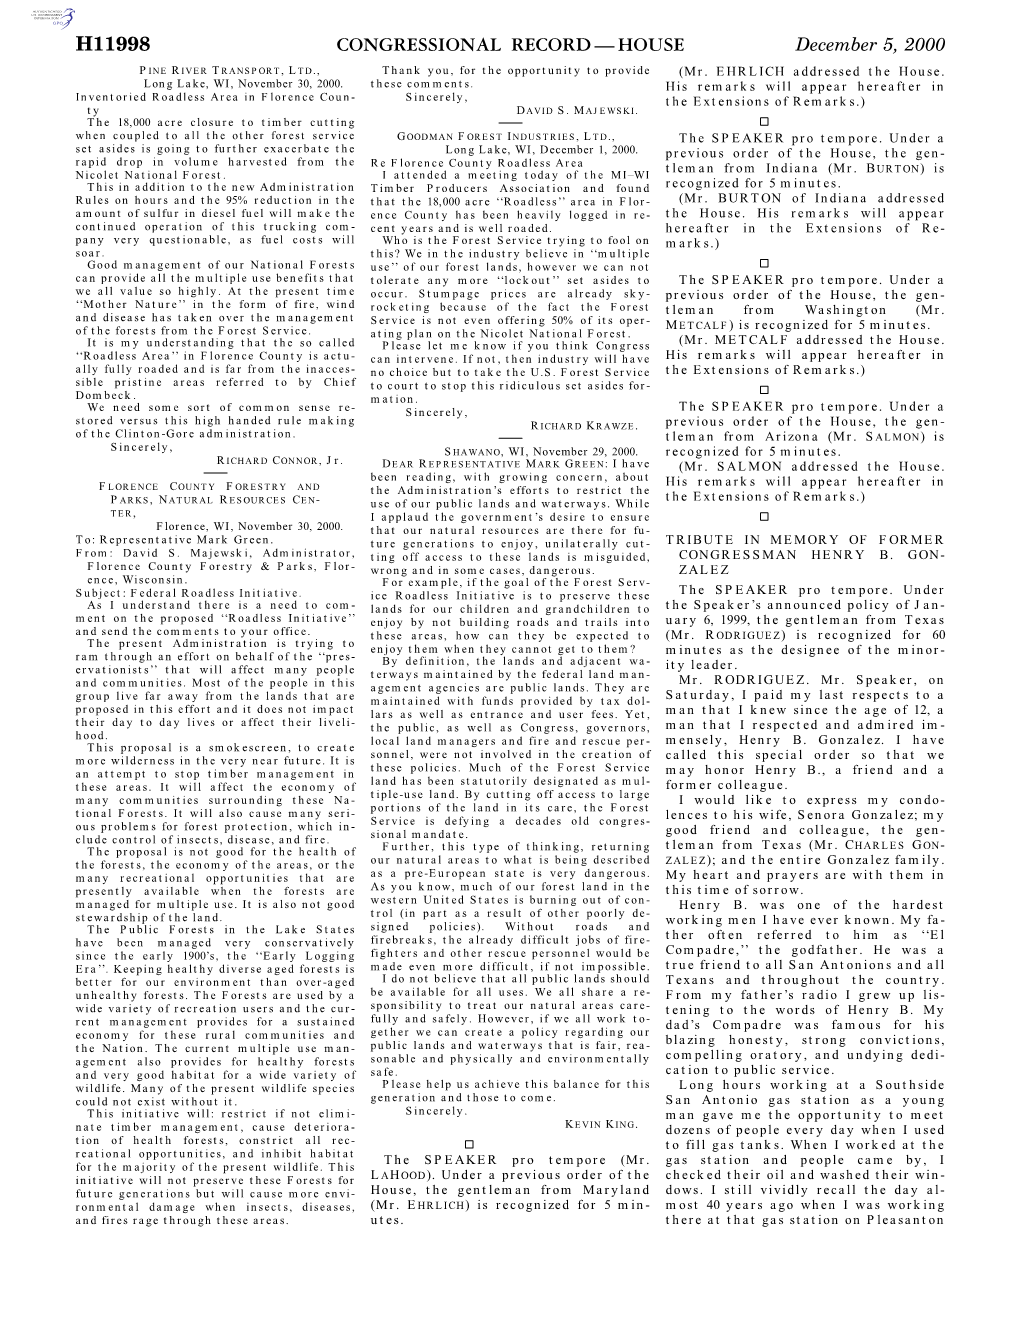 Congressional Record—House H11998